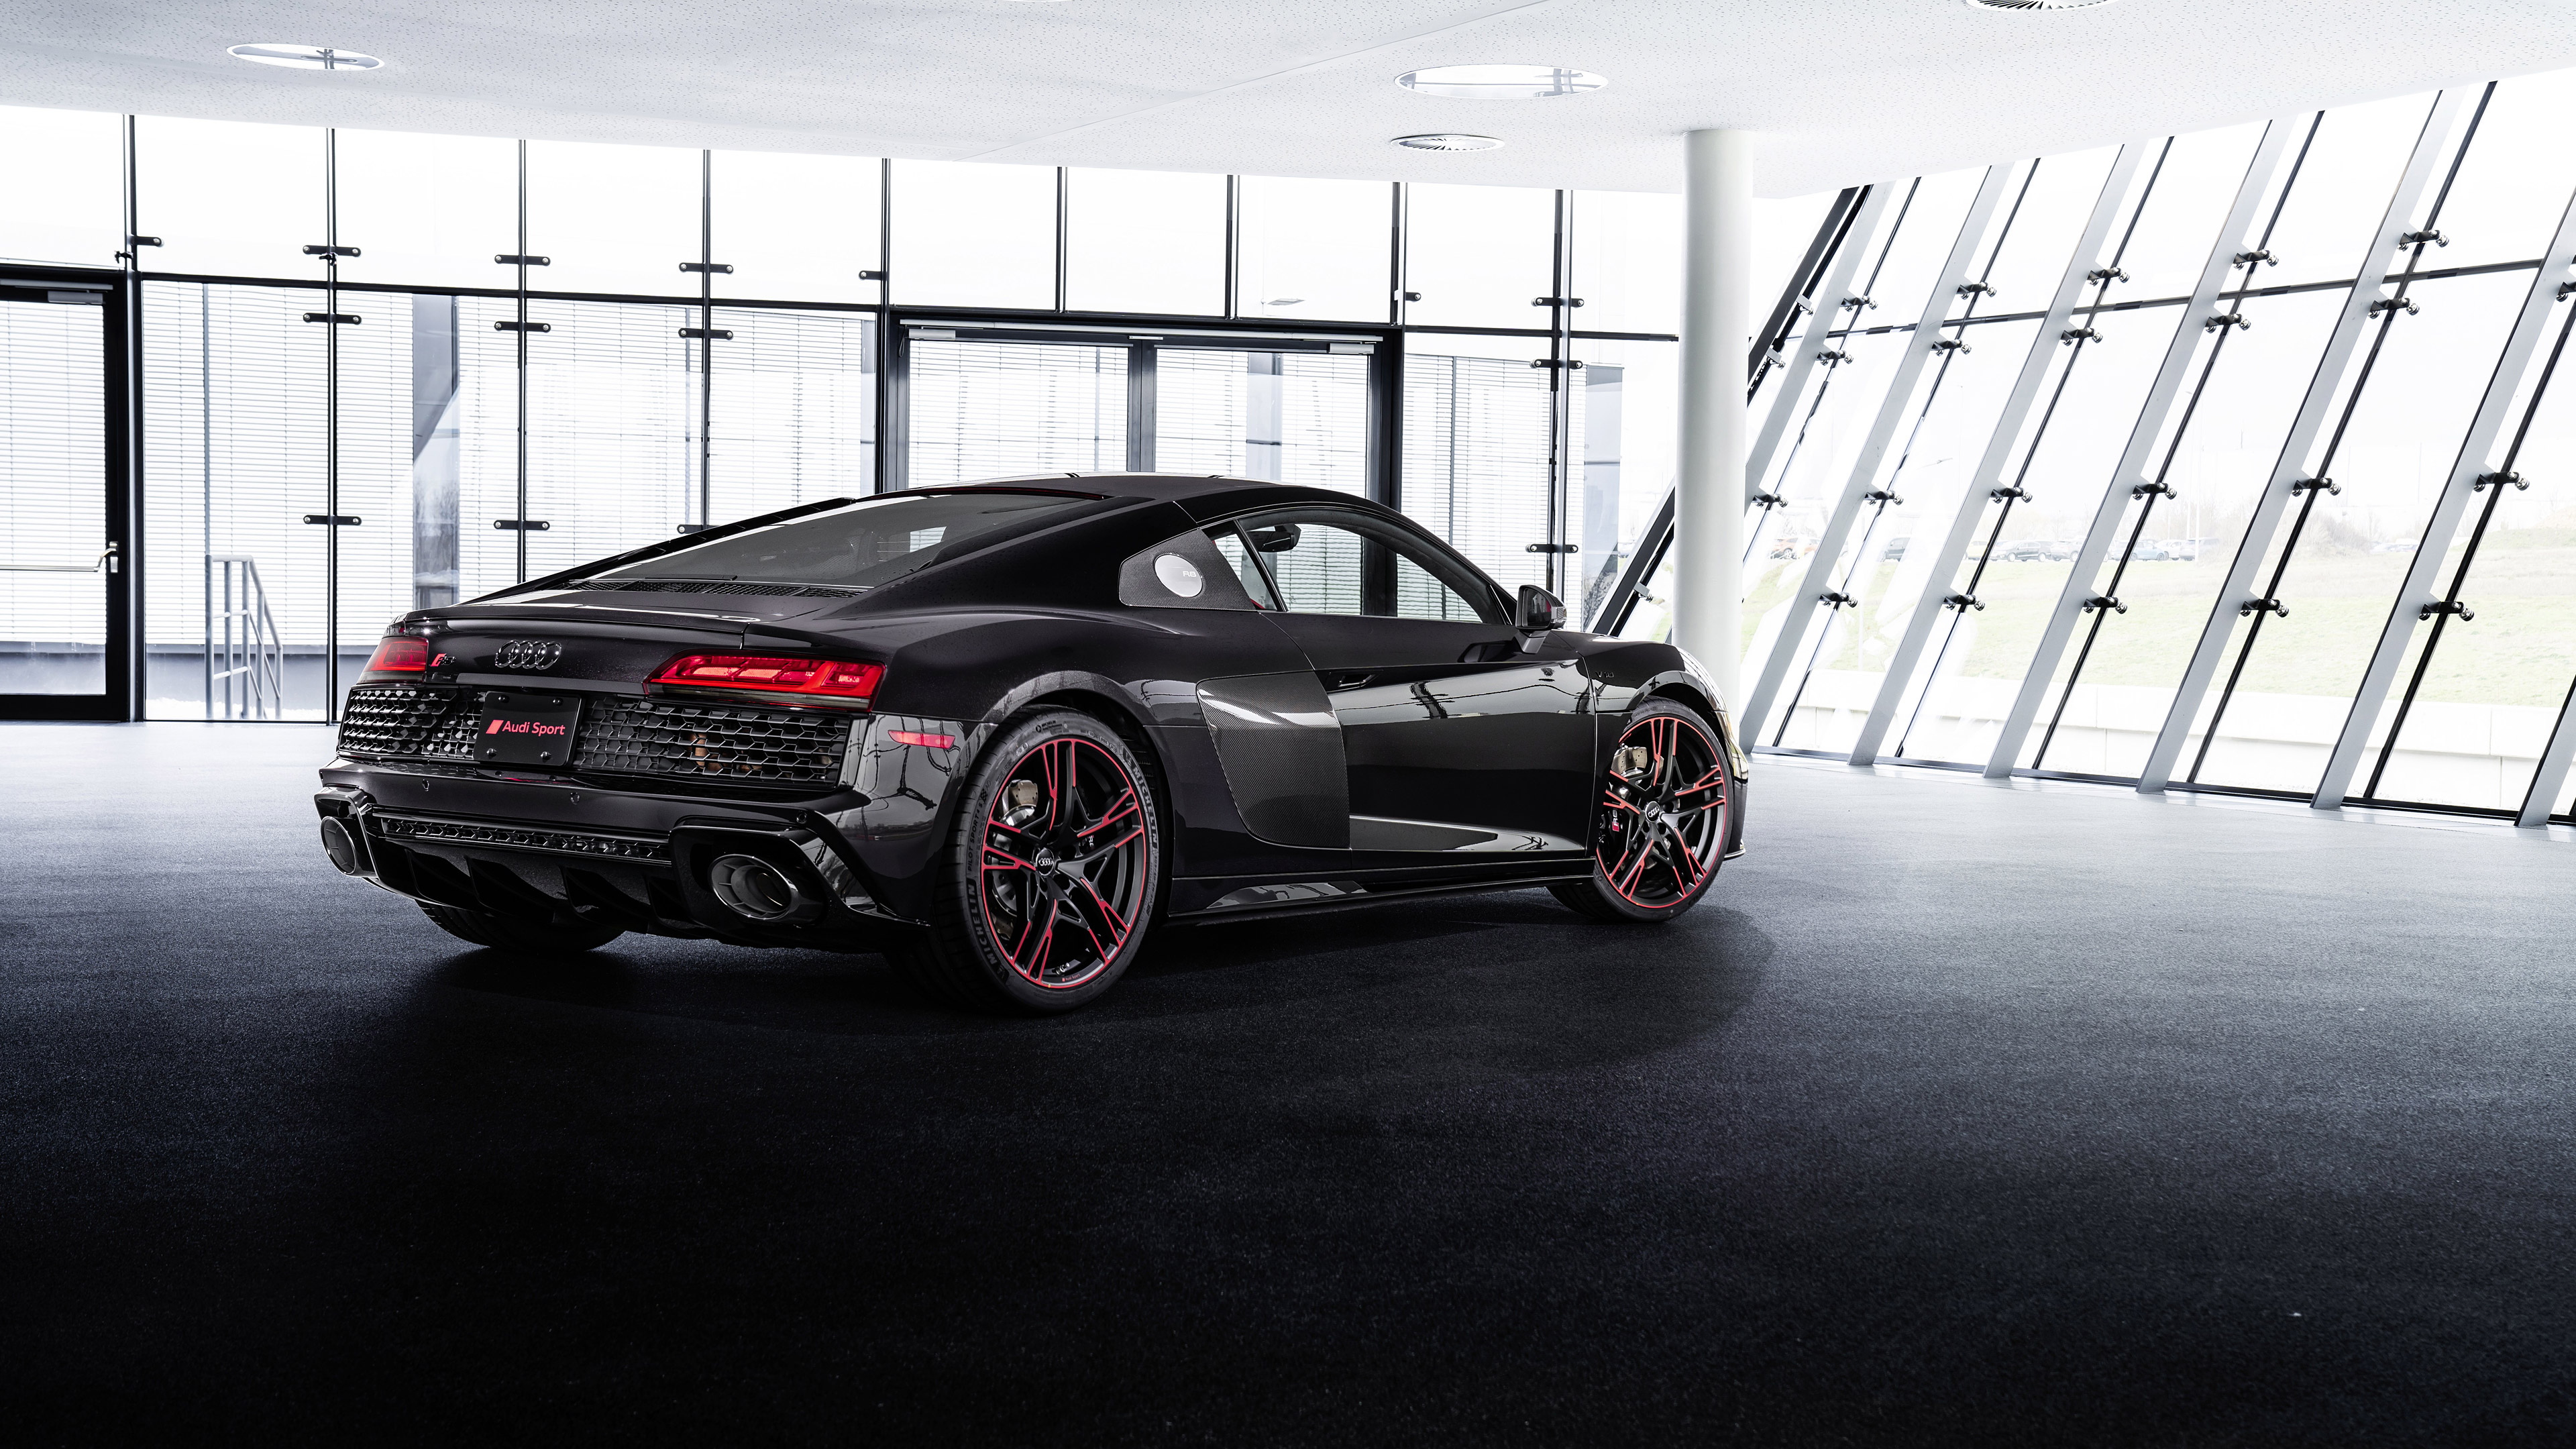  2021 Audi R8 RWD Panther Edition Wallpaper.